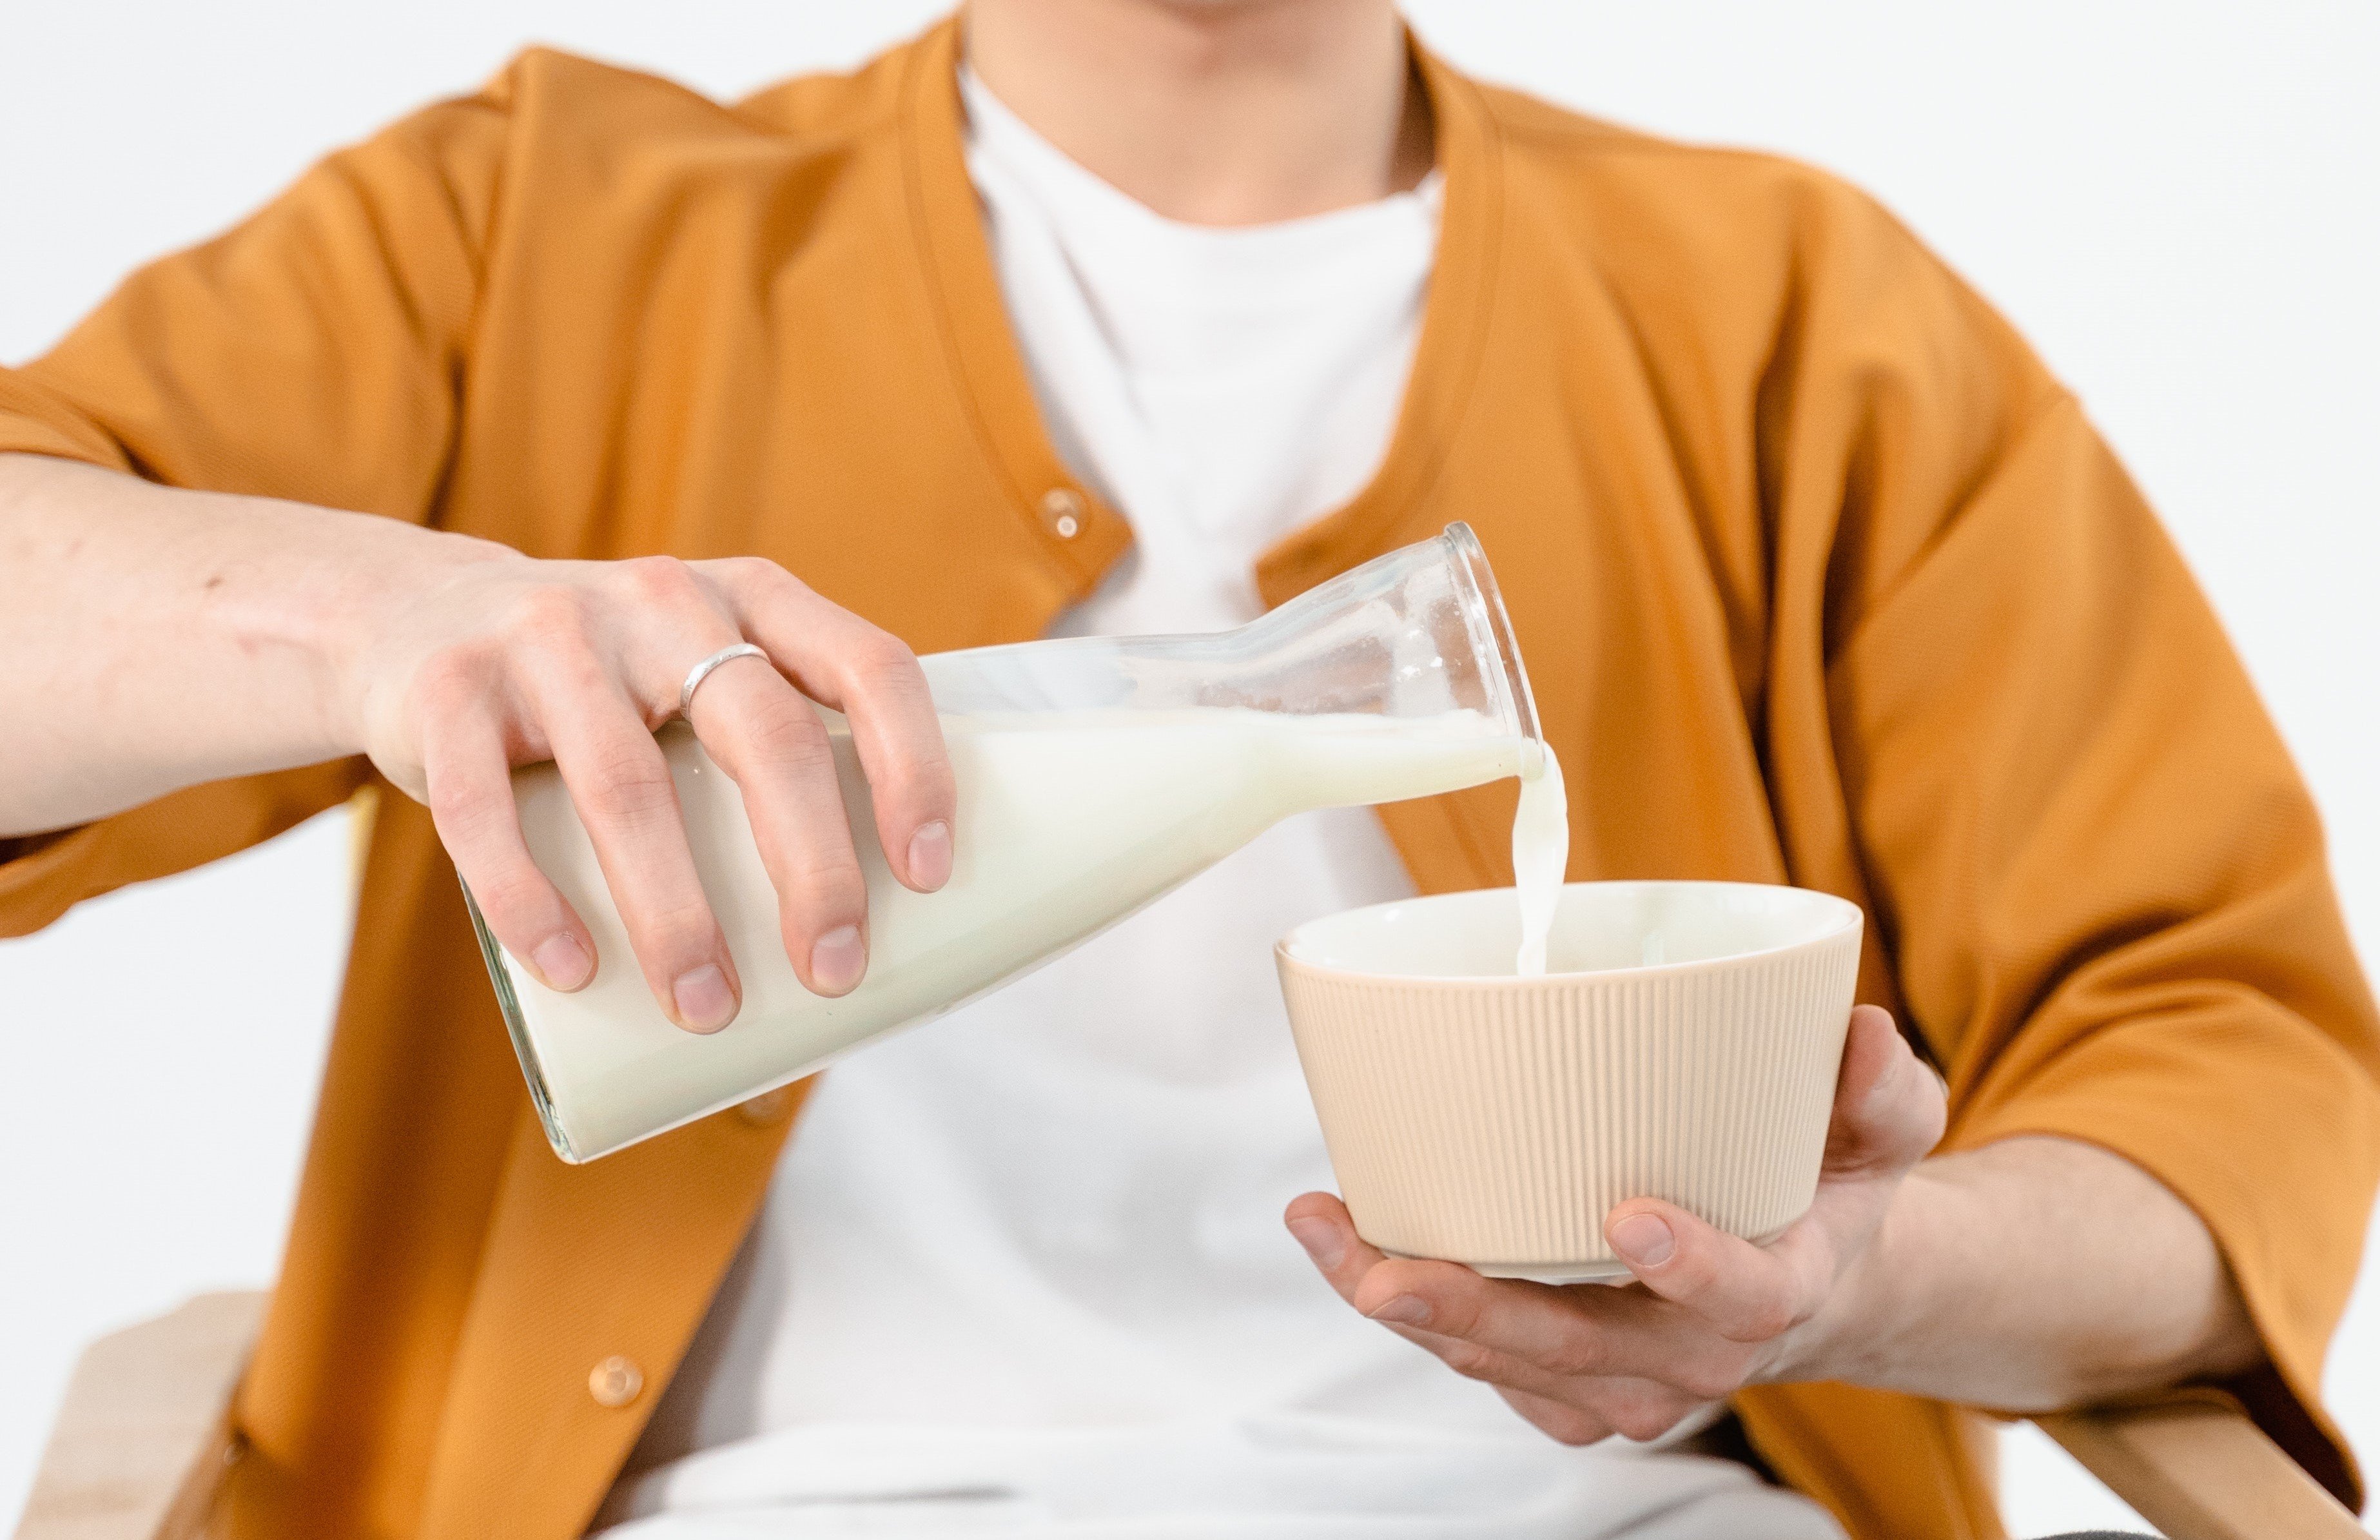 The guy knew his marriage was over when his wife punished him for forgetting to buy milk | Source: Pexels